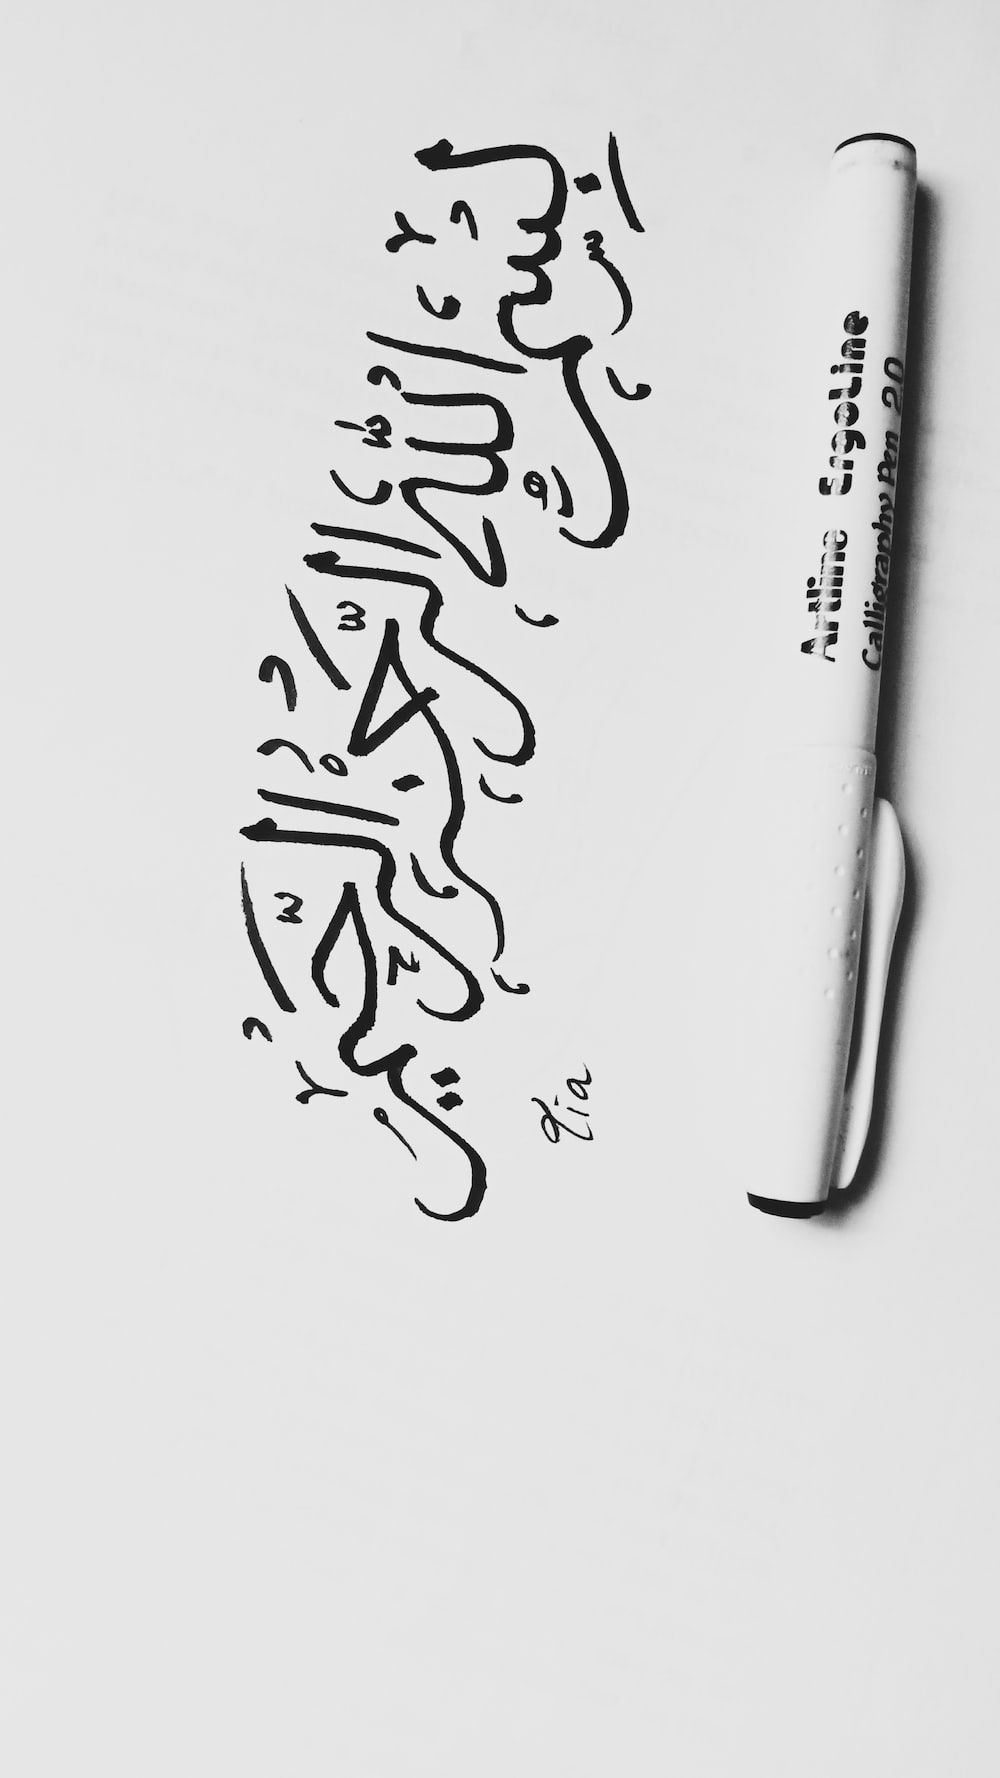 Arabic Calligraphy Picture. Download Free Image